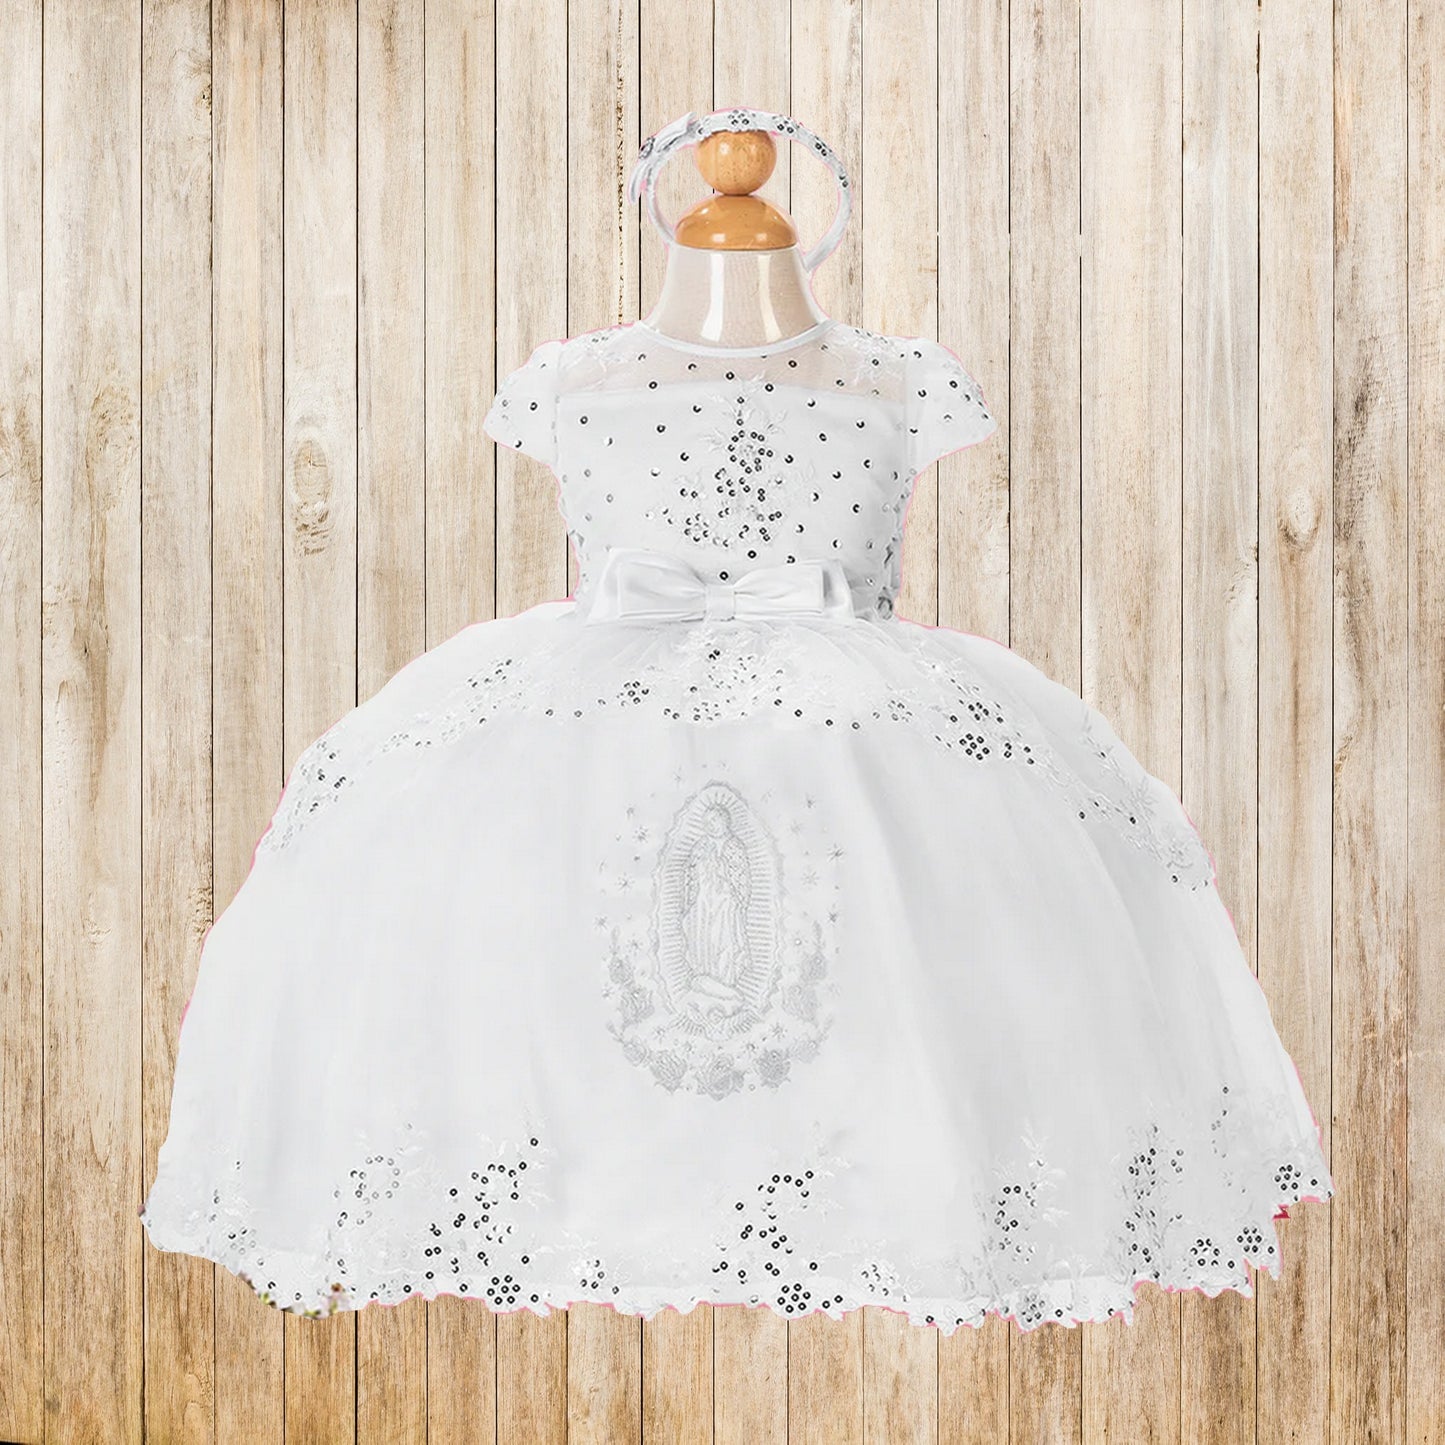 Baptism/Christening Gown AH270